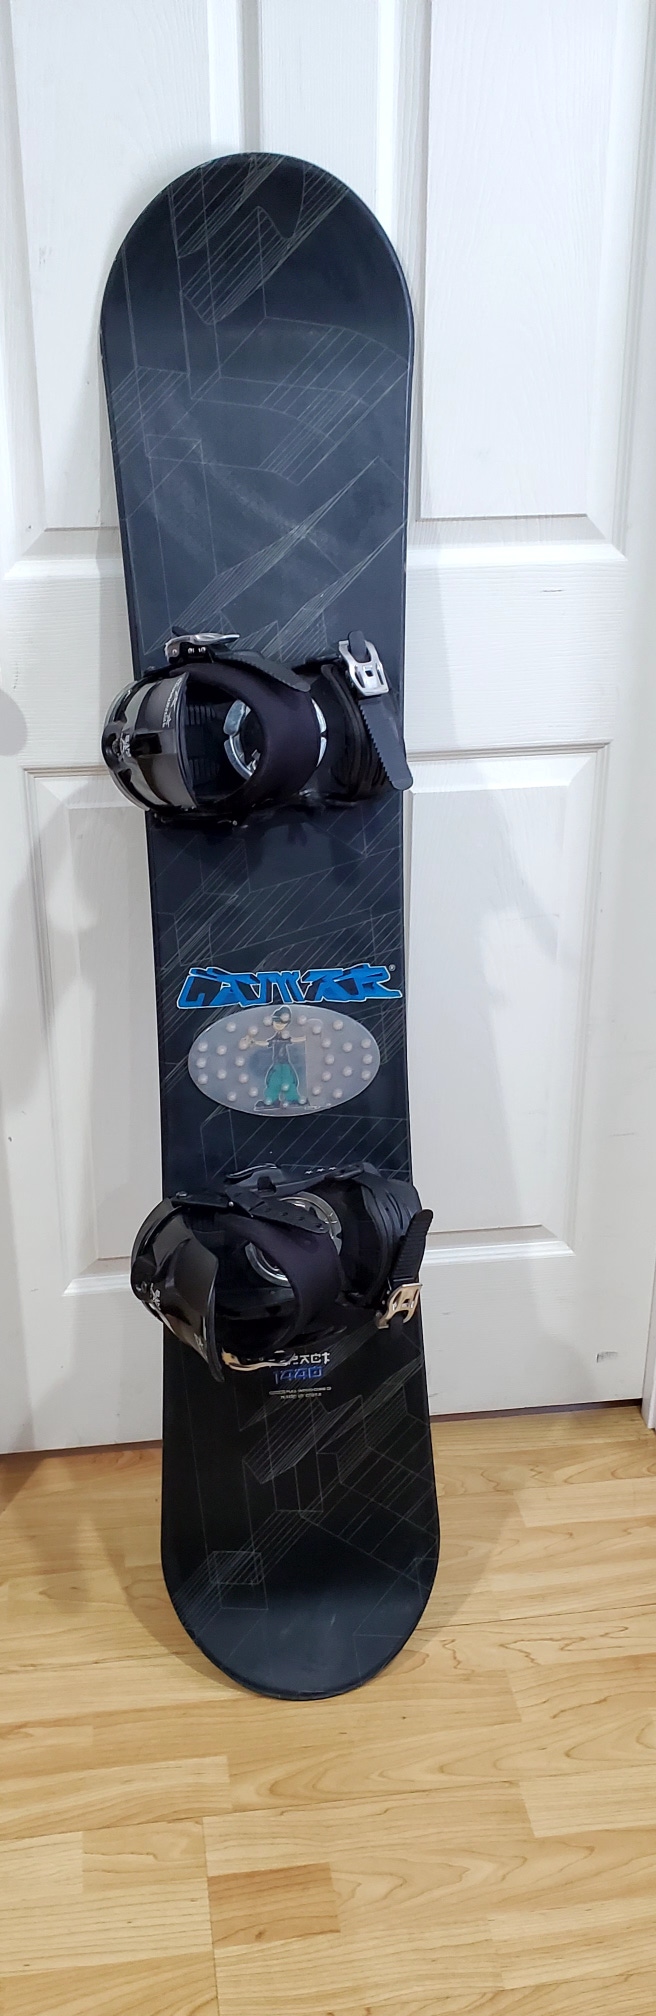 Used Men's Impact 144cm Snowboard Flat freestyle With Bindings reflect adjustable s-m 5-8 true Twin